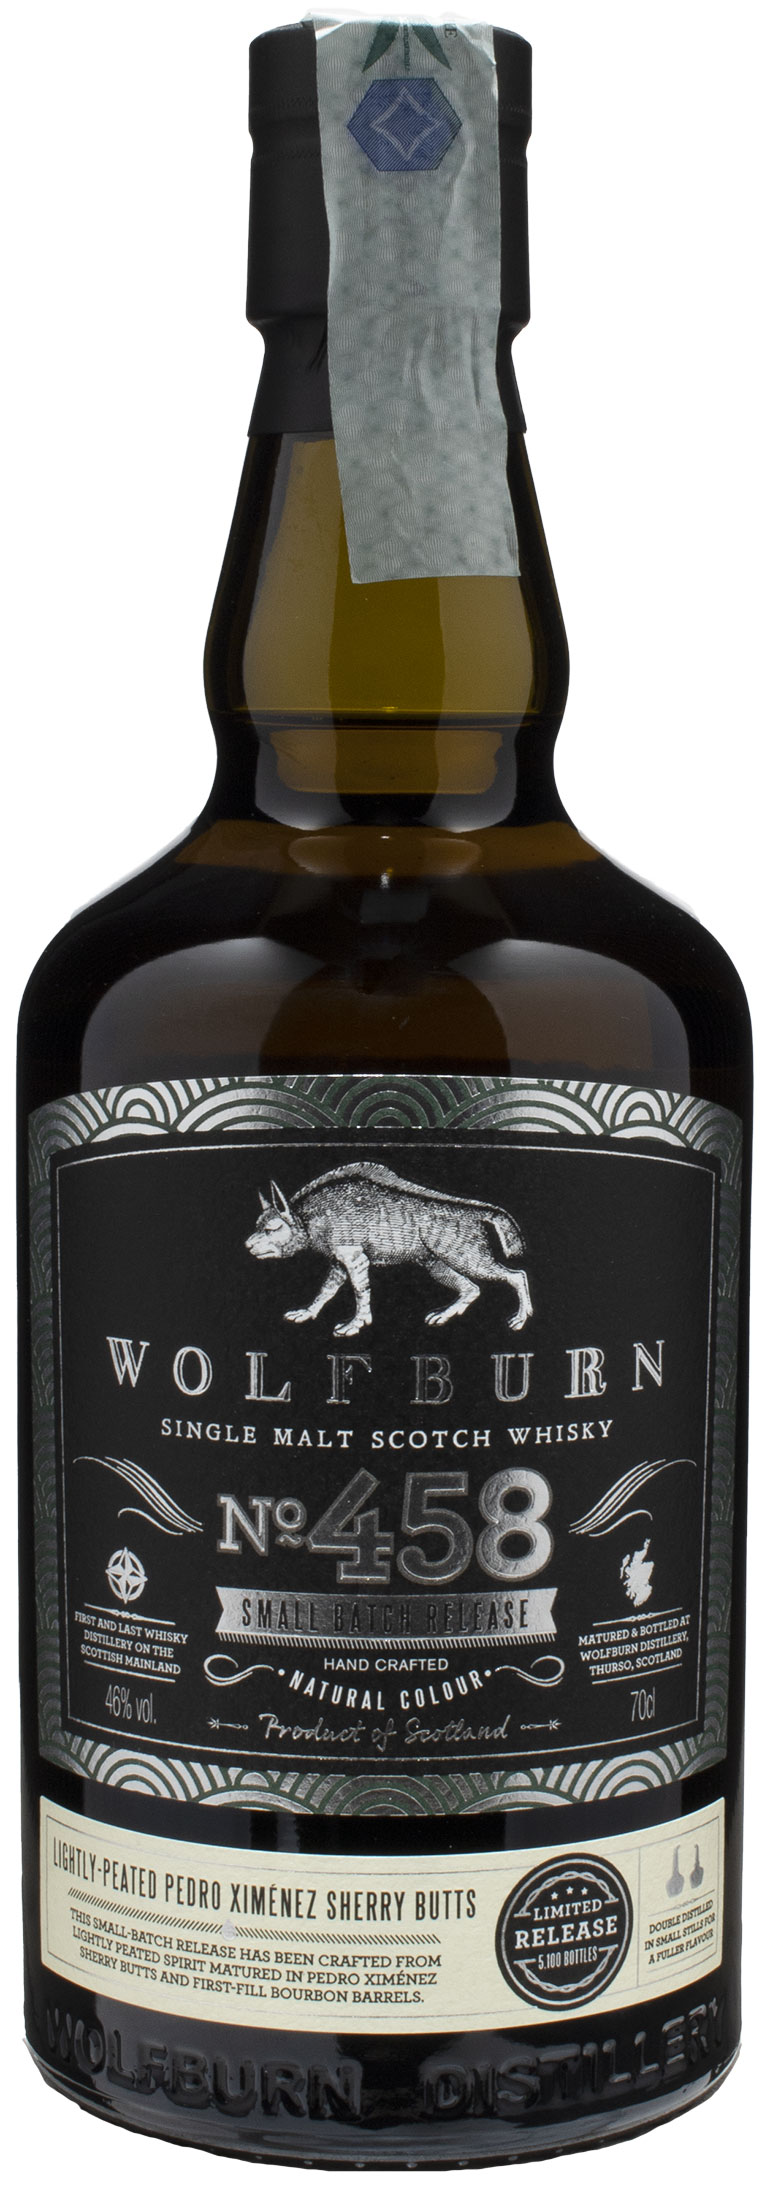 Wolfburn Single Malt Scotch Whisky 458 Small Batch Release Lightly-Peated Px Sherry Butts 0,7L